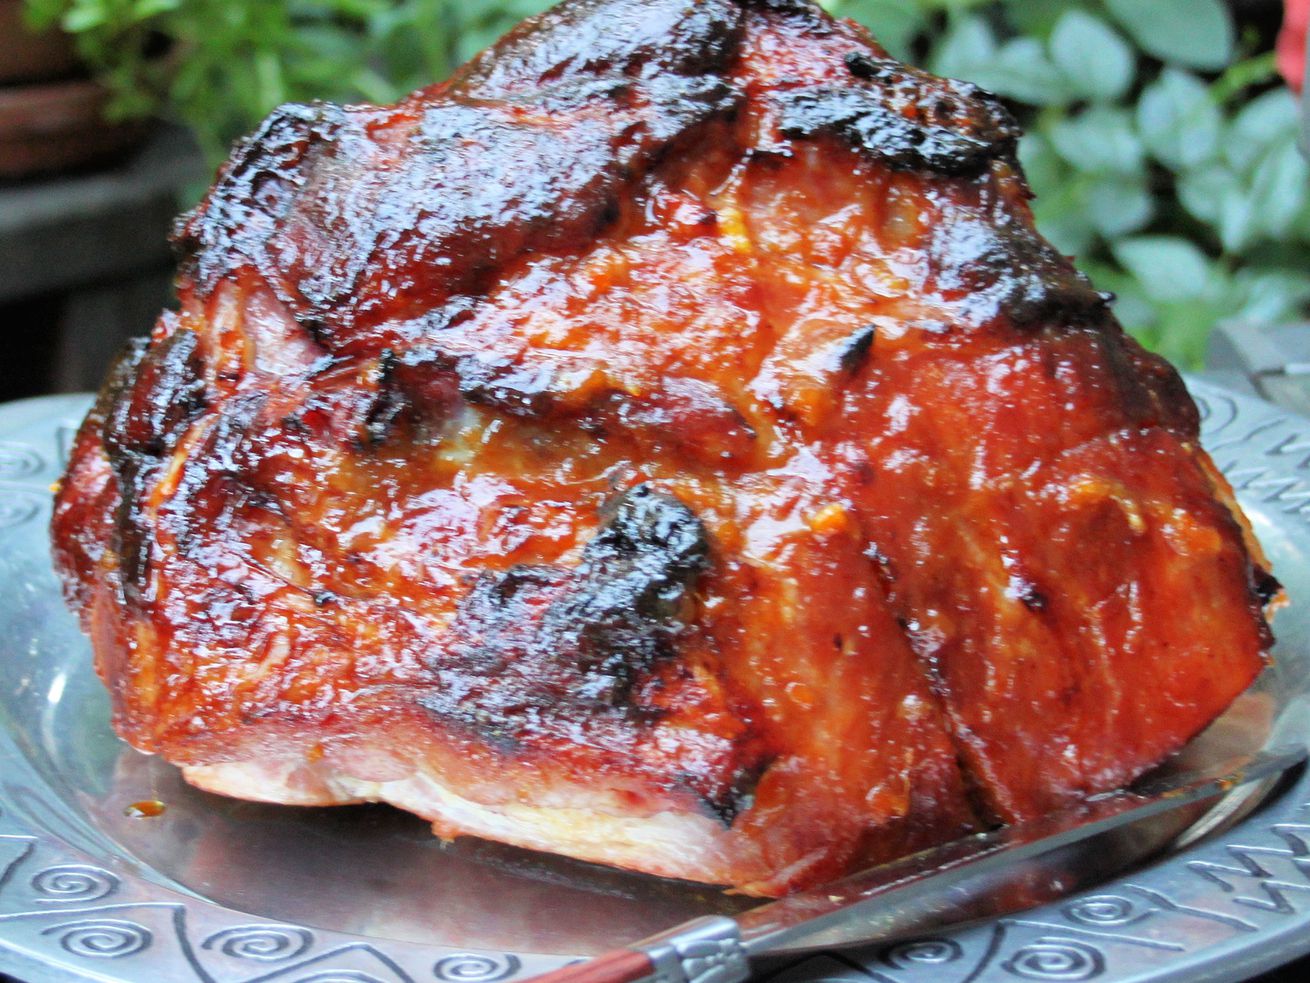 For best results when roasting or grilling a ham, purchase a good-quality ham with the bone or partial bone in, which adds more flavor to the ham while cooking. Avoid a spiral ham, because it will easily dry out.